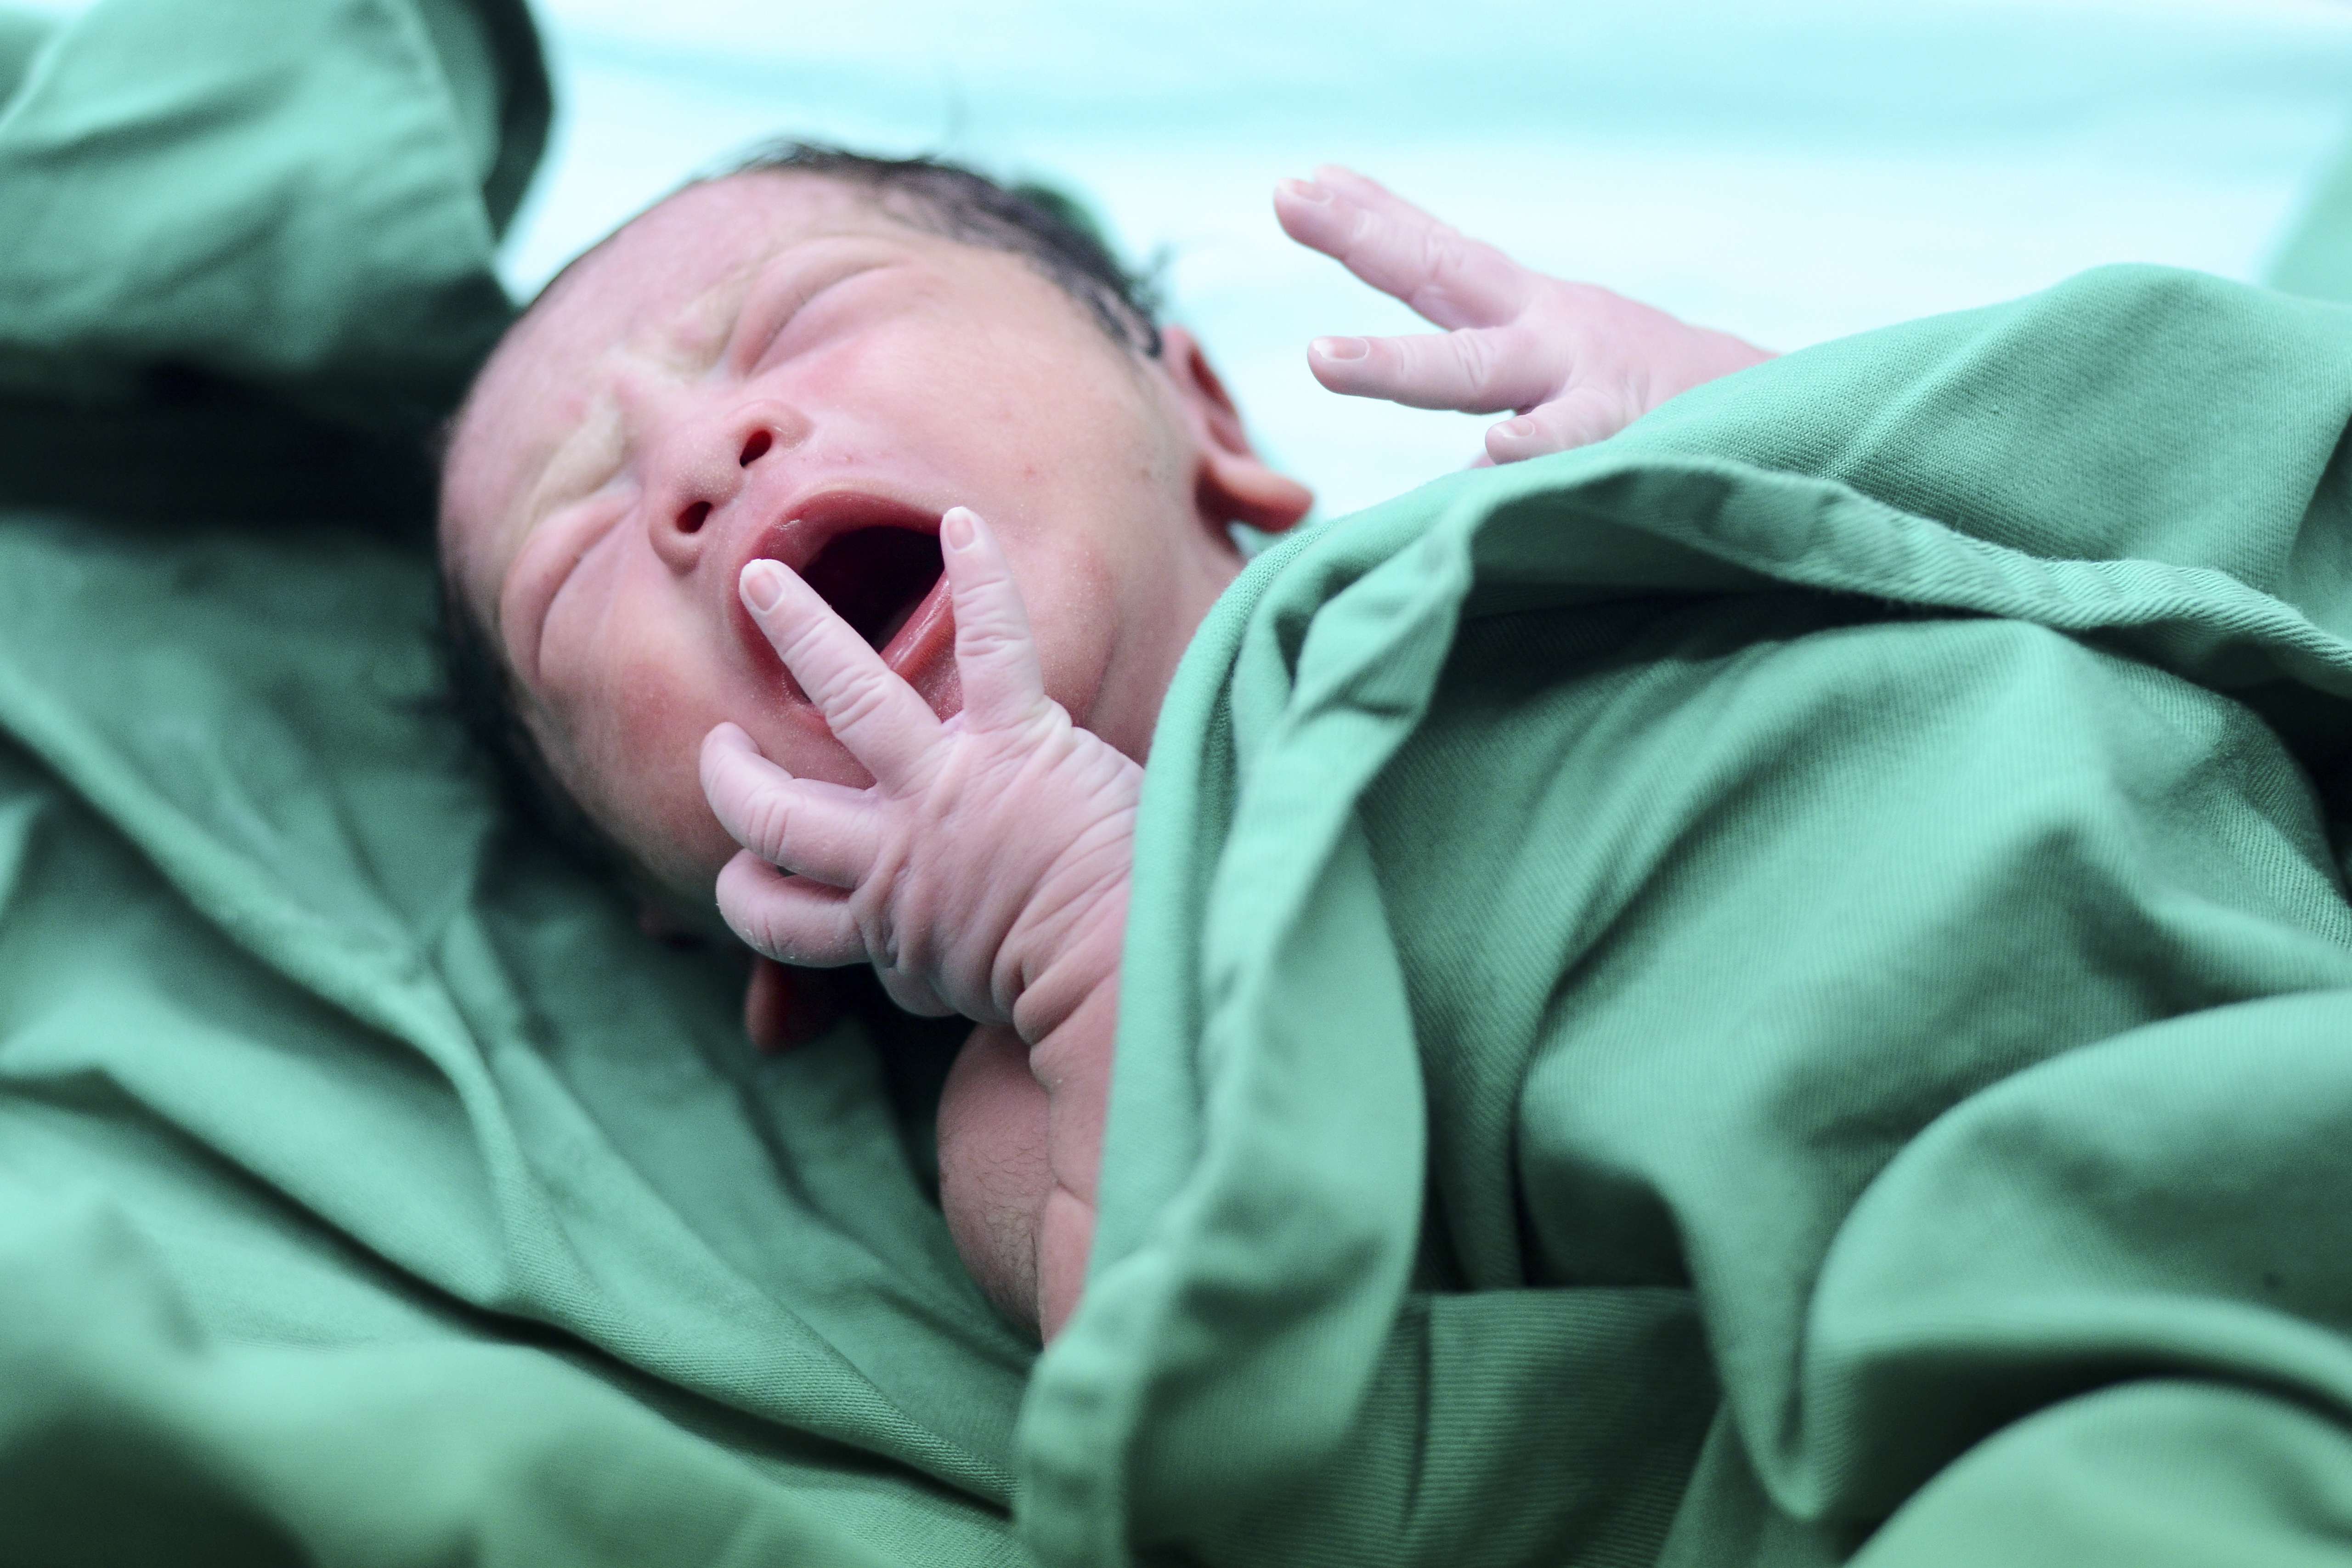 A new study has found the Chinese rate of births by caesarean section to be comparable to the US rate.